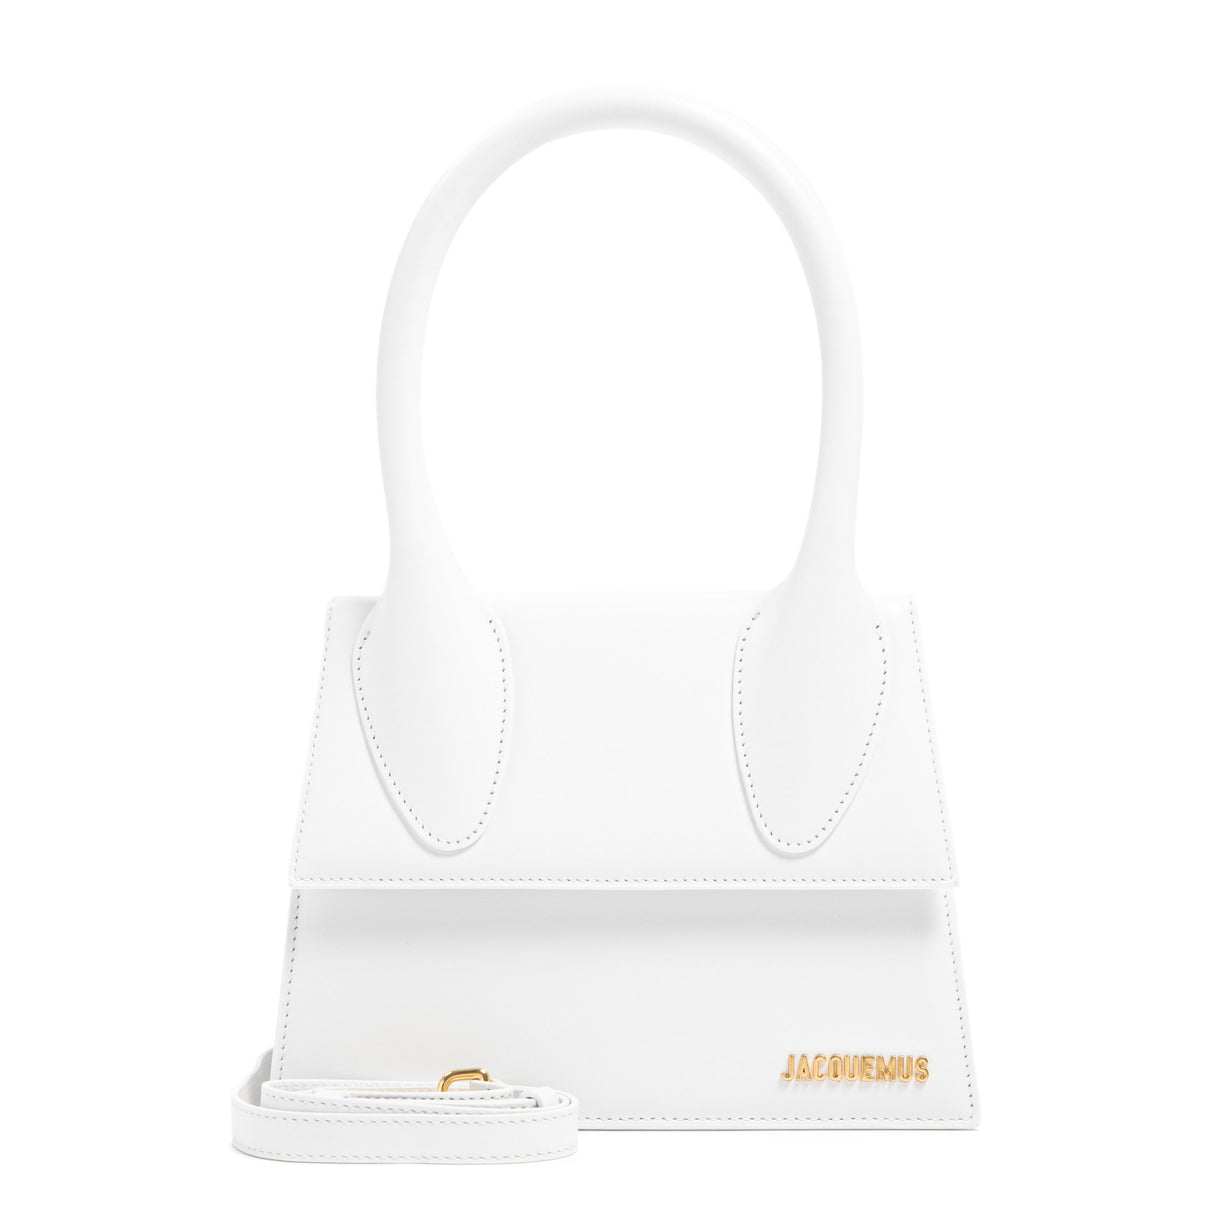 JACQUEMUS Stylish White Leather Shoulder Bag for Women